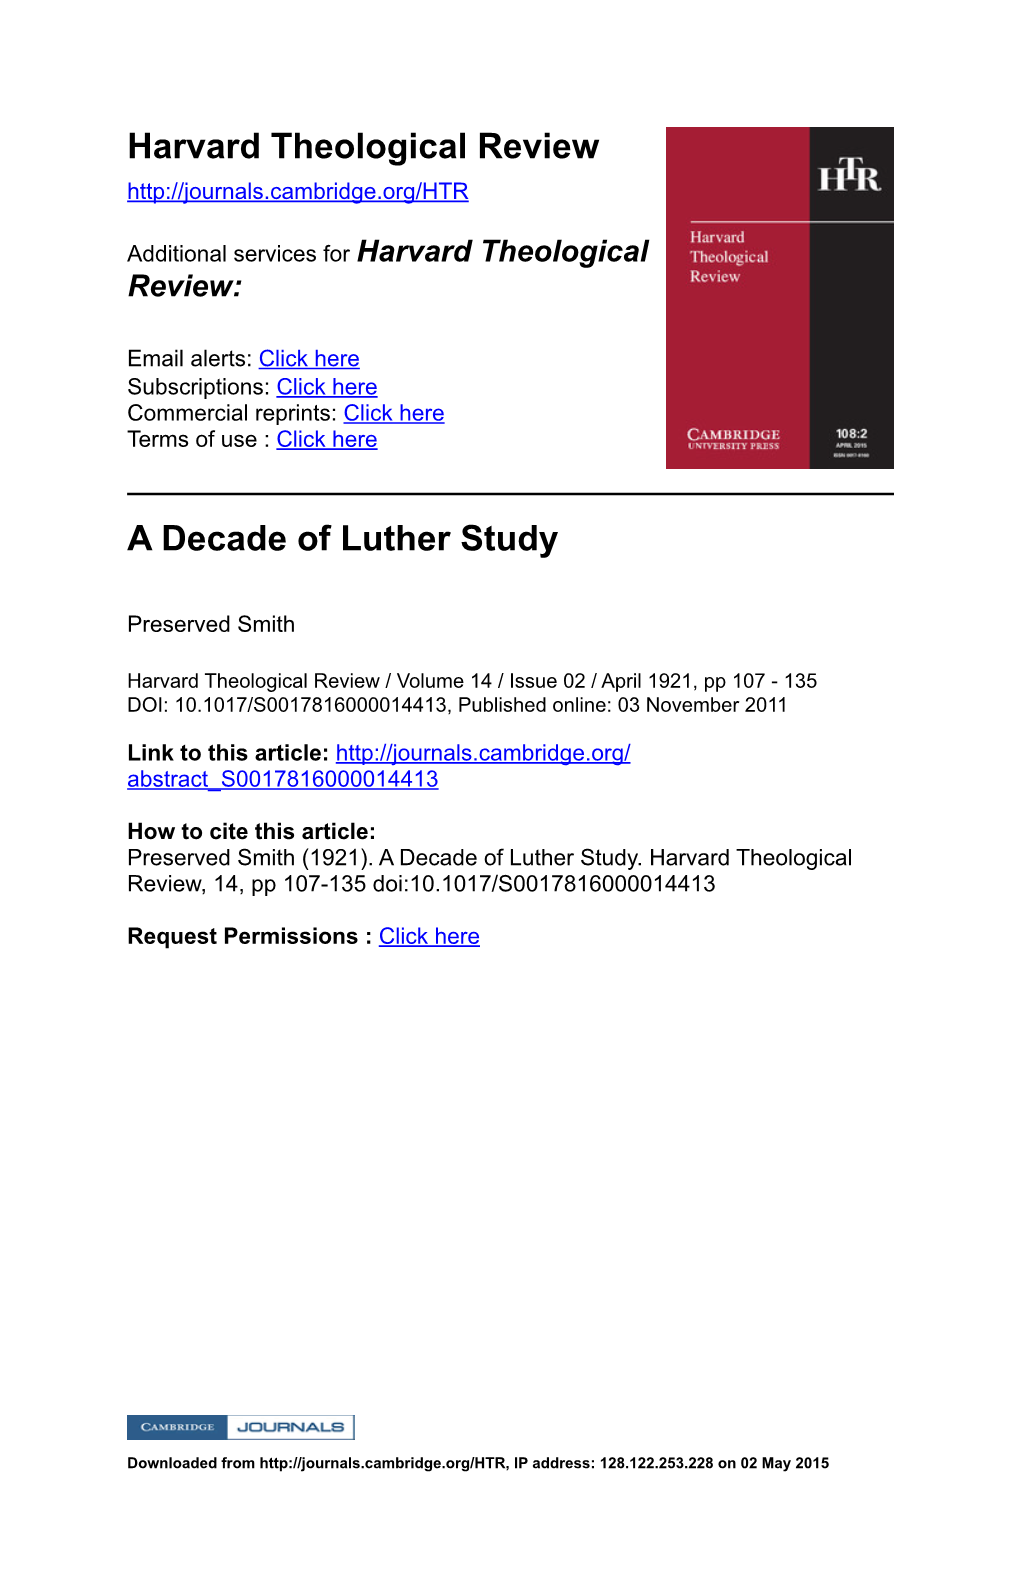 Harvard Theological Review a Decade of Luther Study